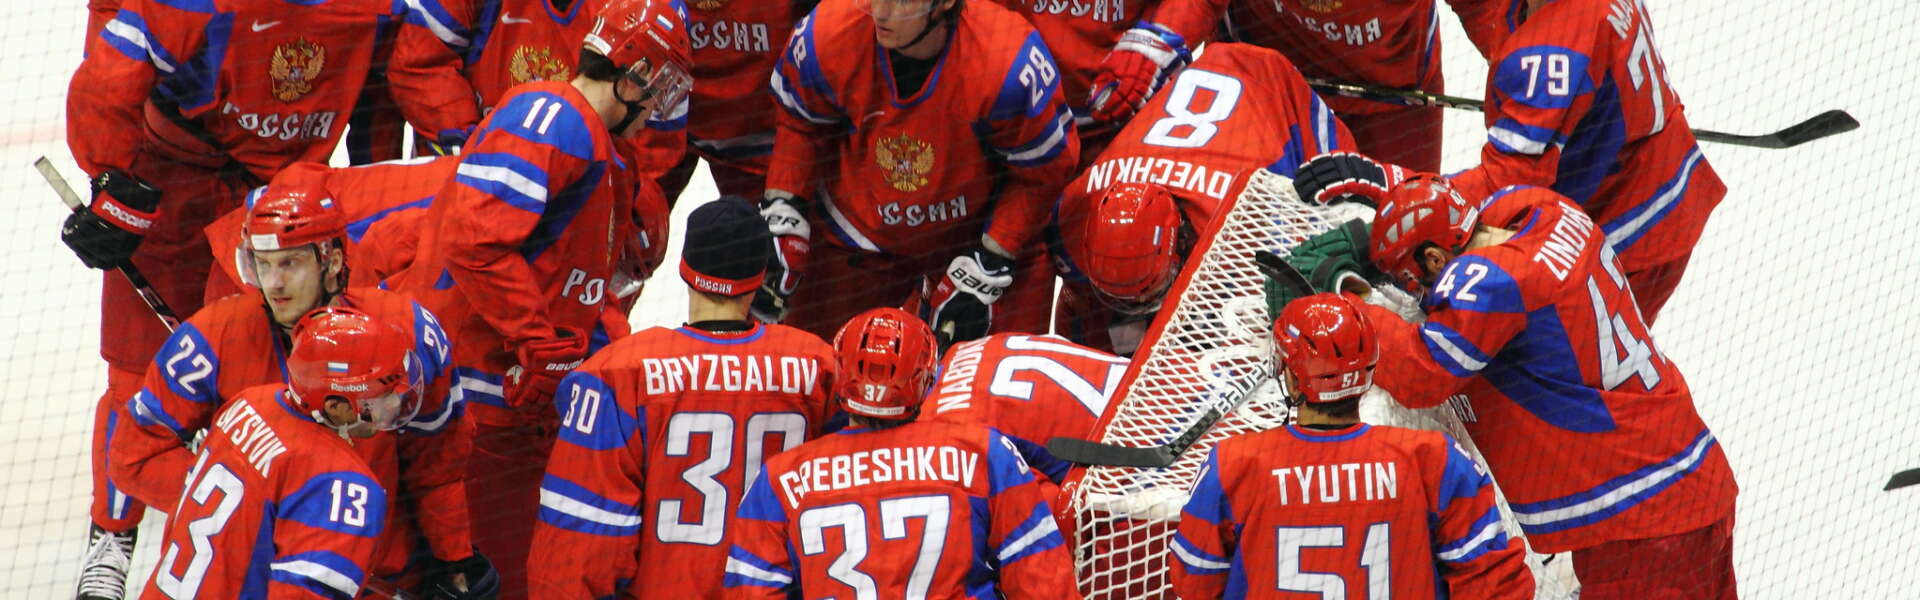 Russian Olympic Hockey players, wearing vibrant red jerseys, huddle around the net